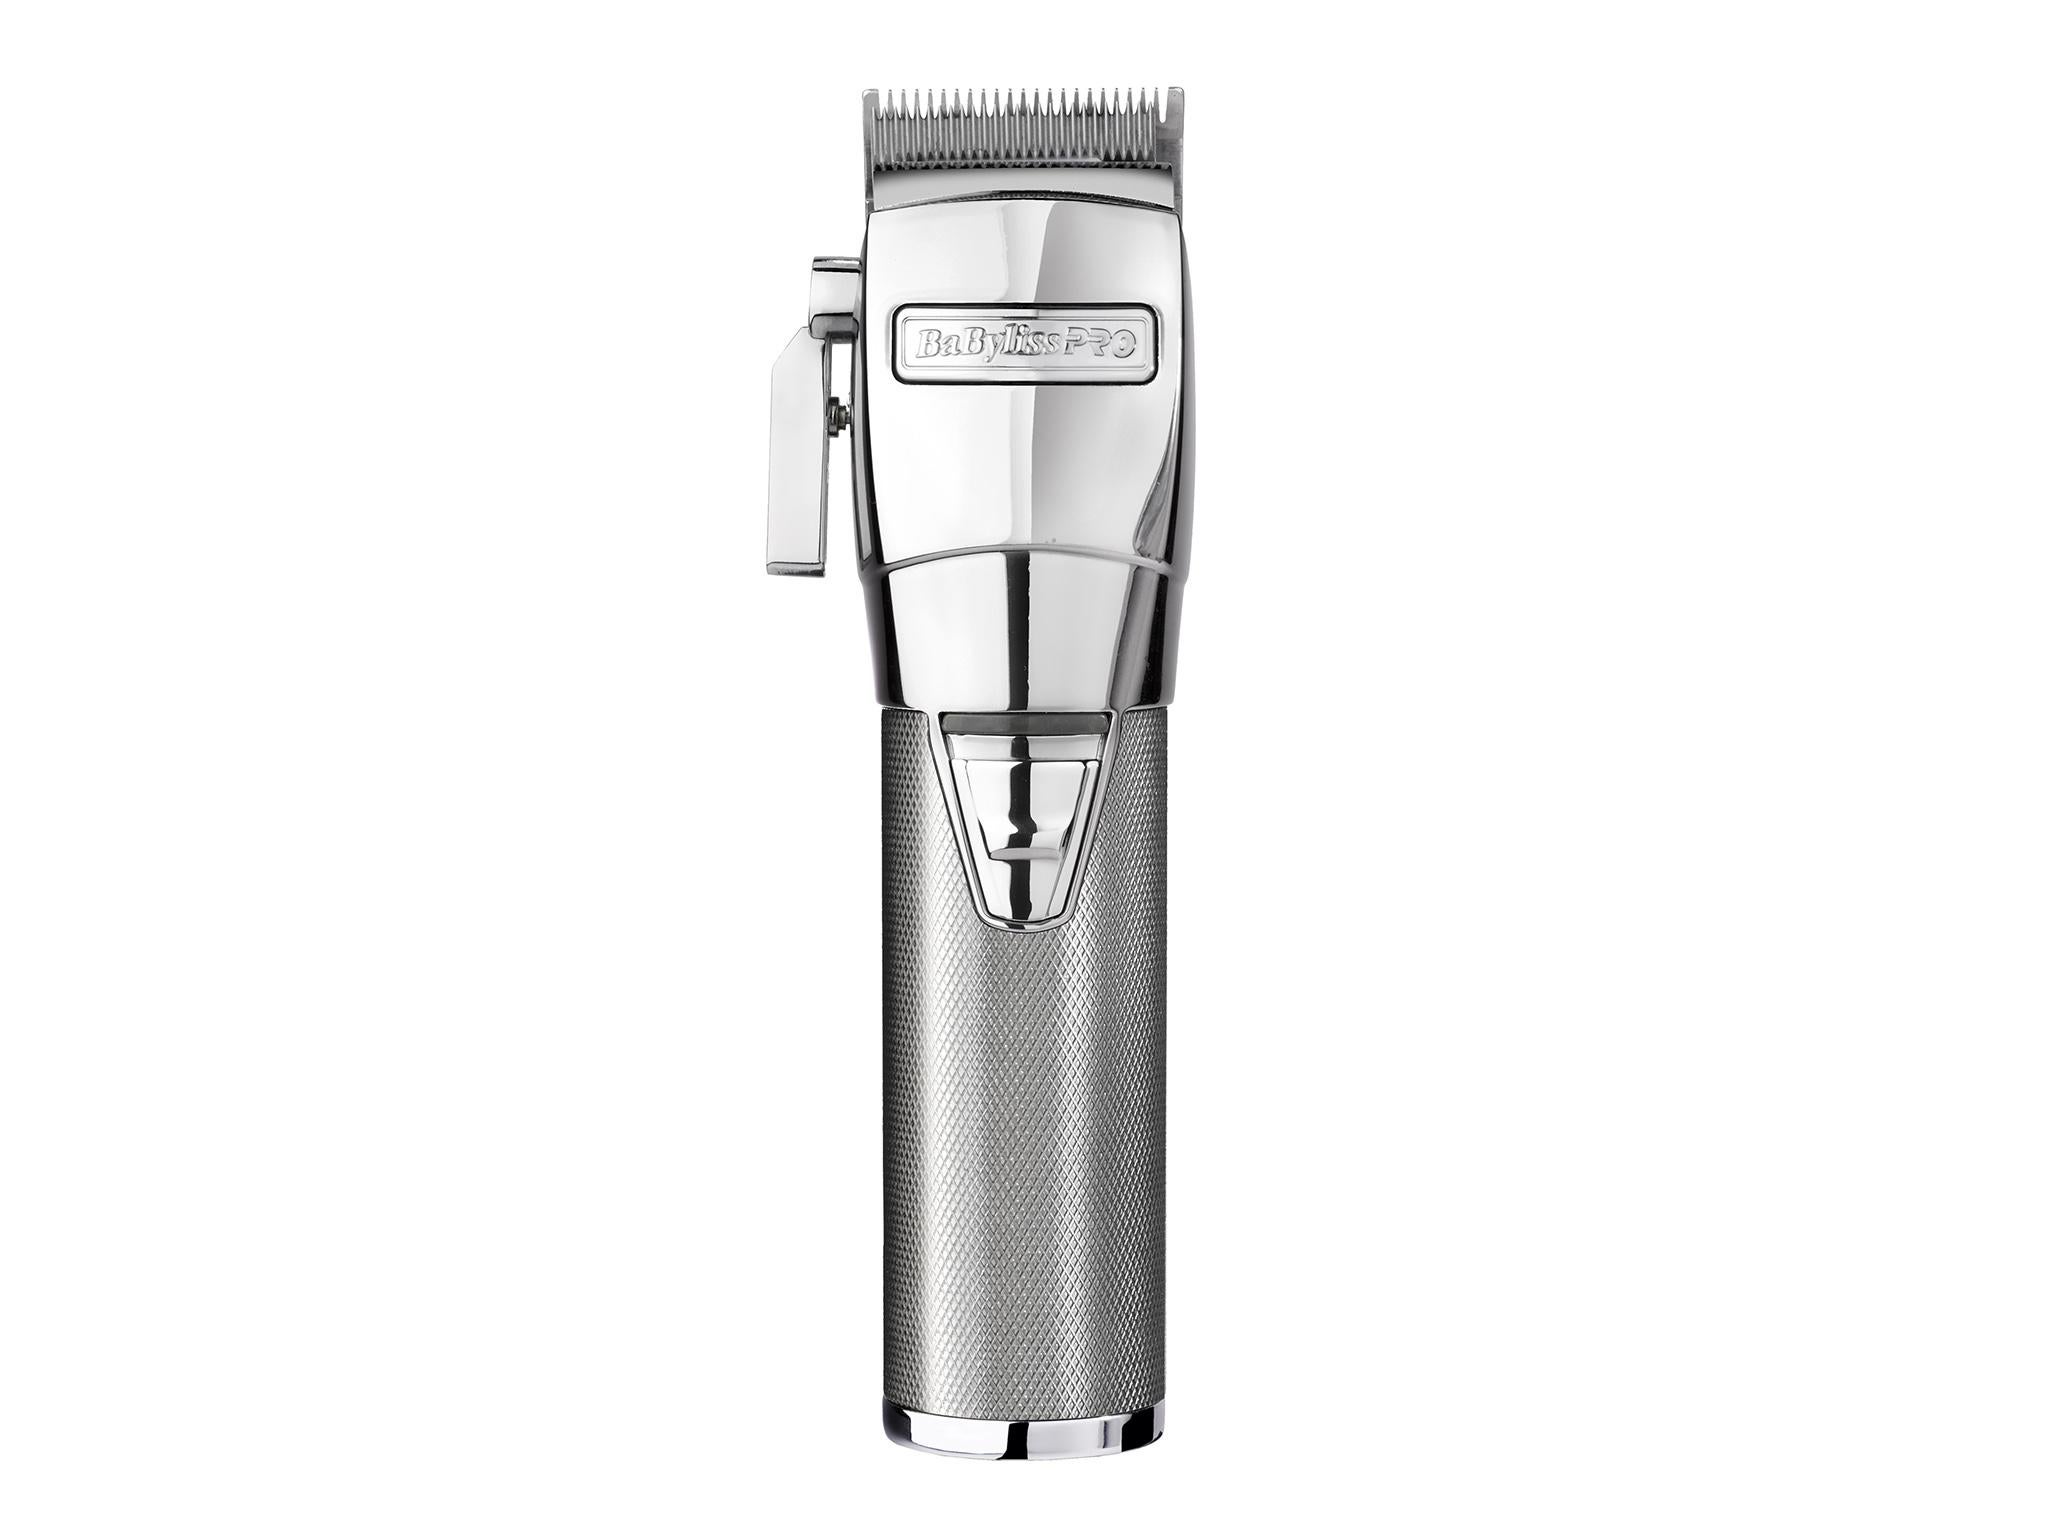 cchome hair clippers